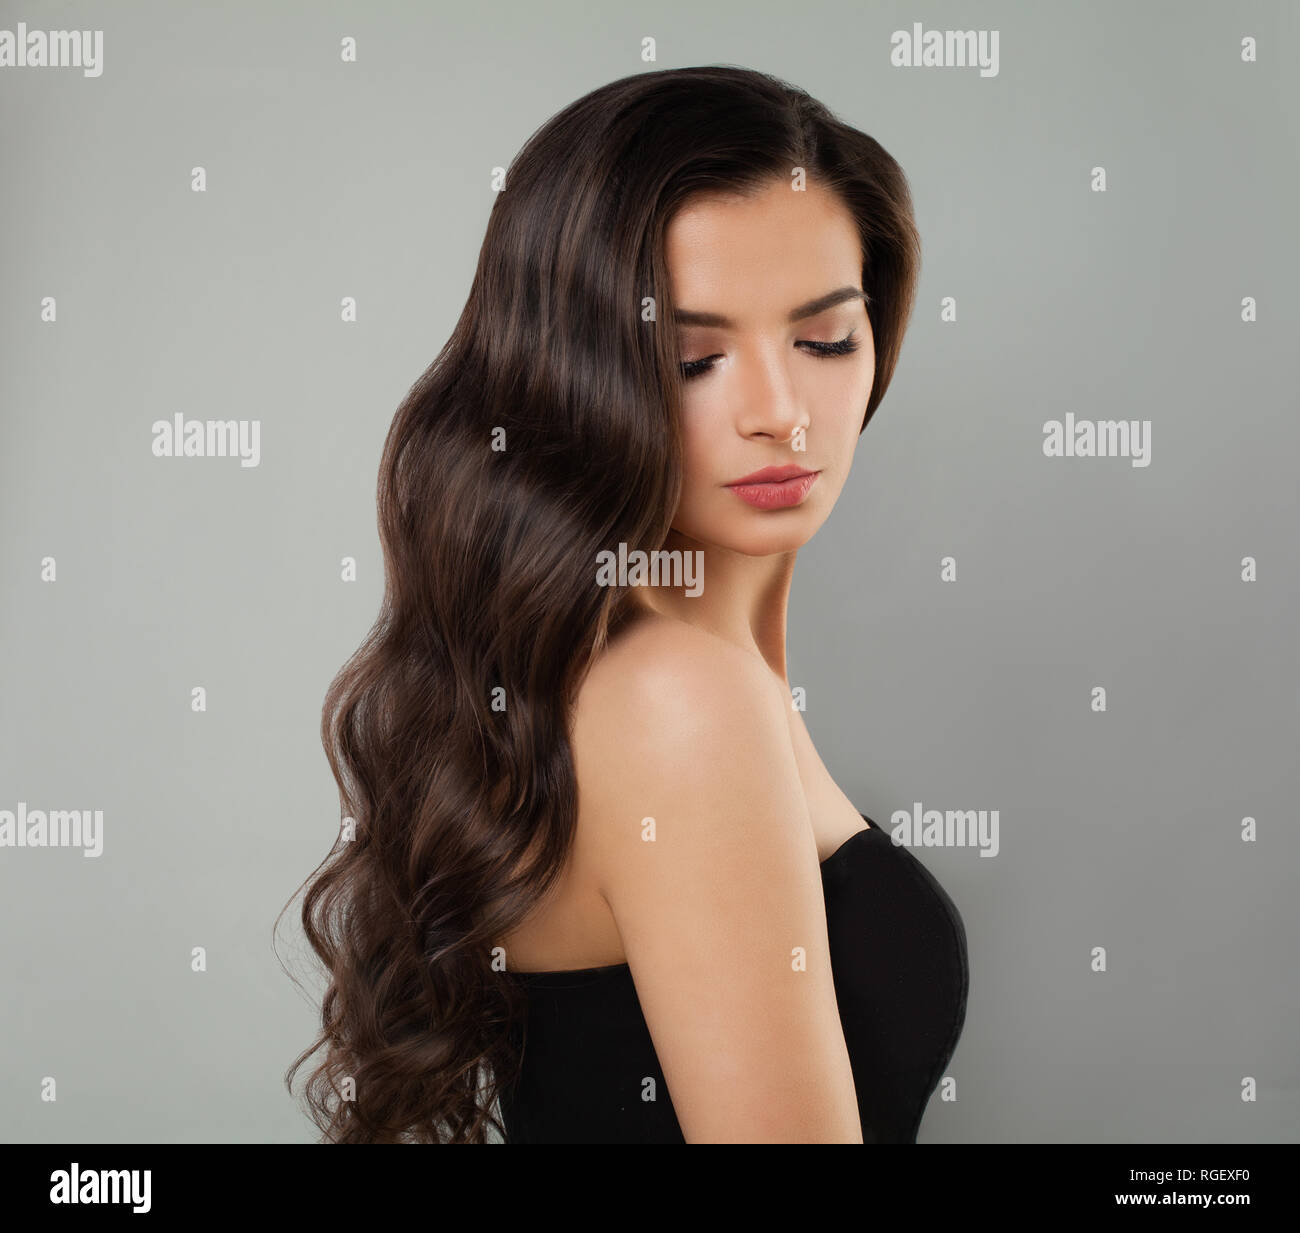 Young brunette model portrait. Perfect woman with long wavy hairstyle Stock Photo